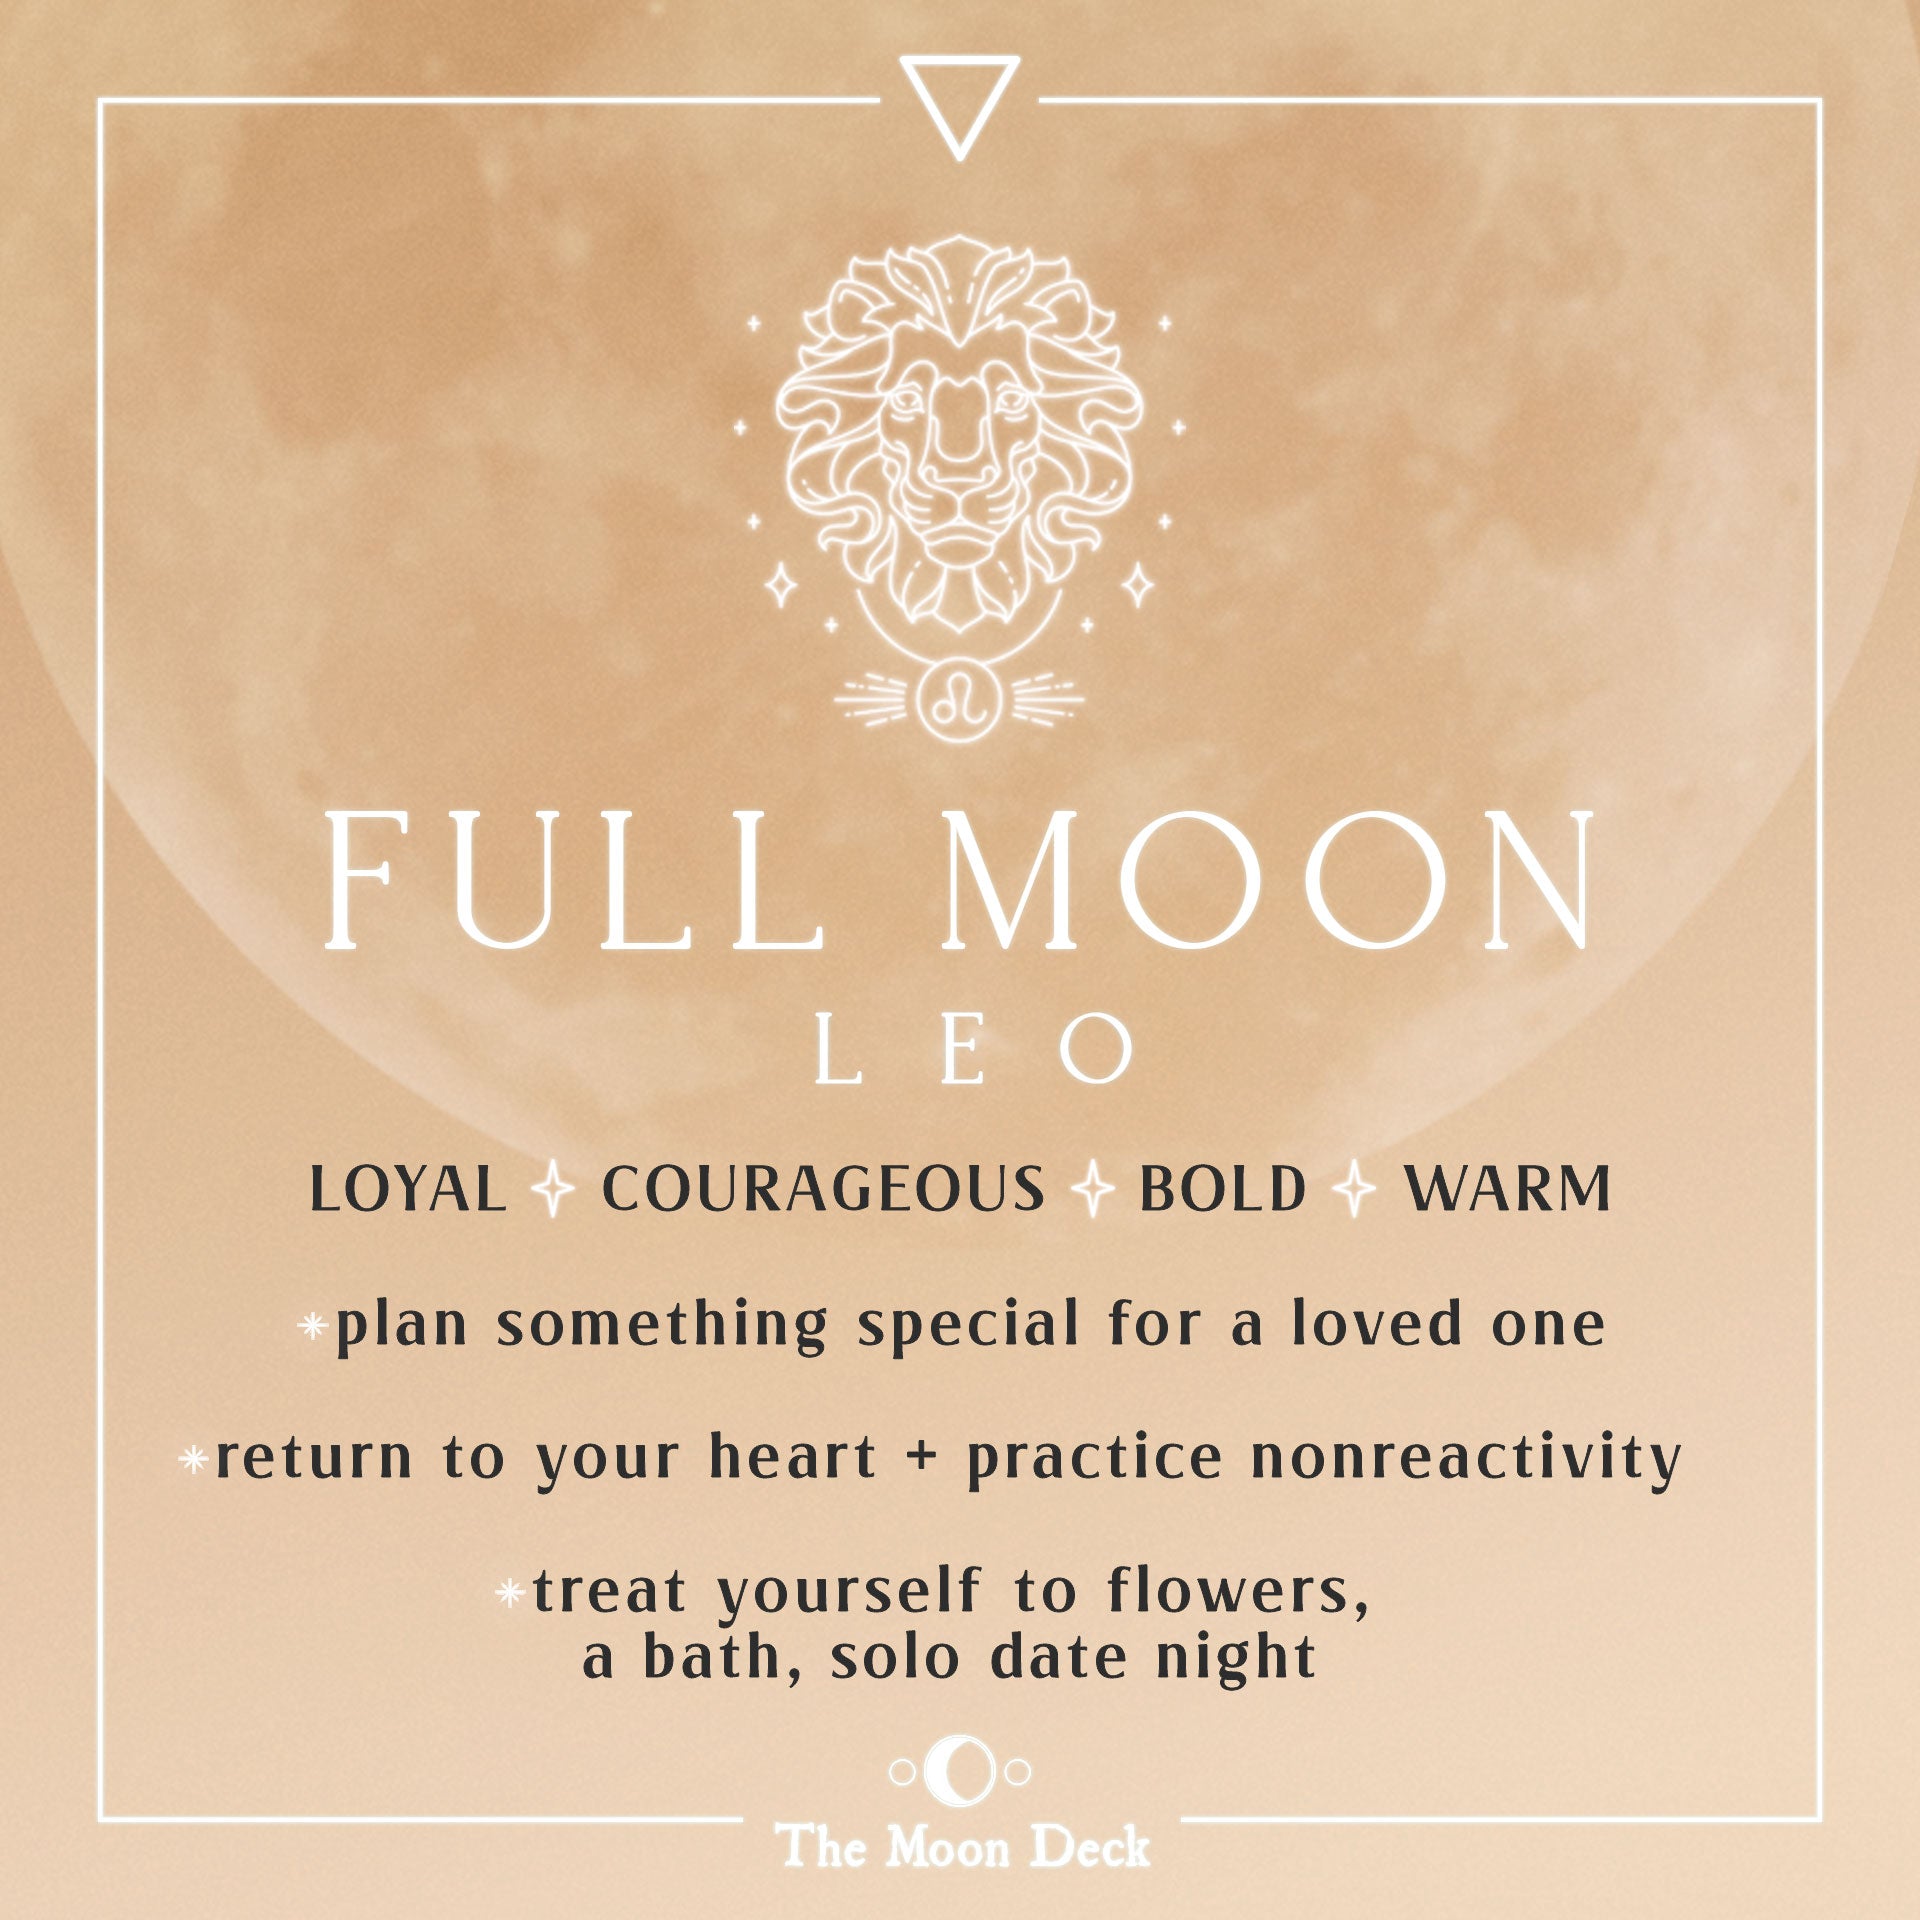 LEO FULL MOON :: Aligning With Your Authenticity